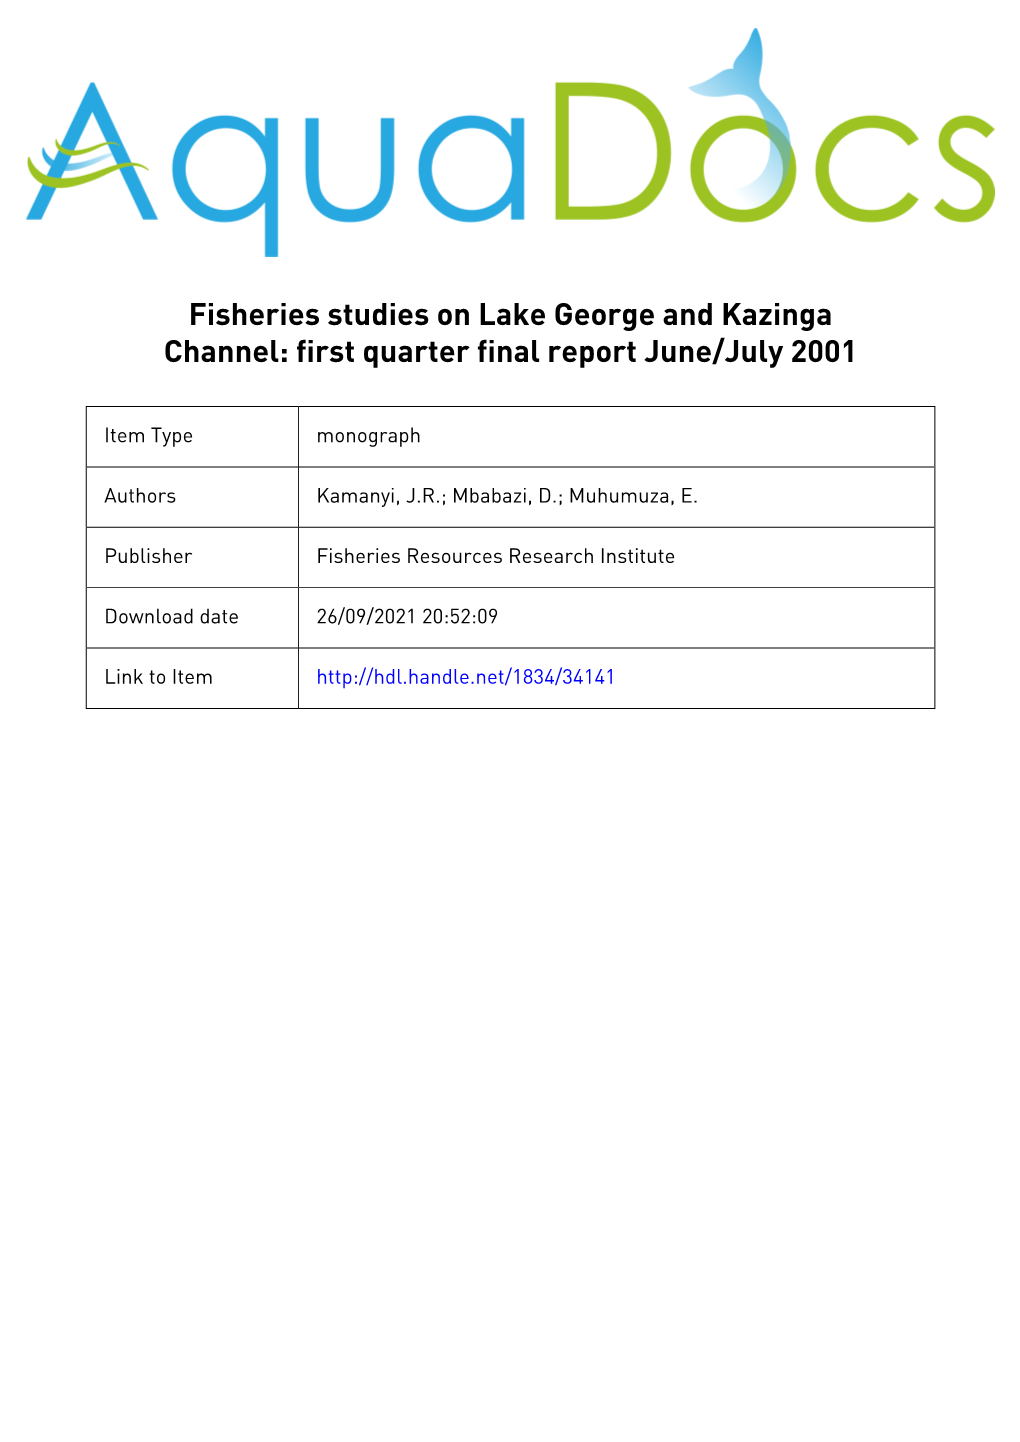 Ries Studies on Lake George and Kazinga Channel: First Quarter Final Report June/July 2001